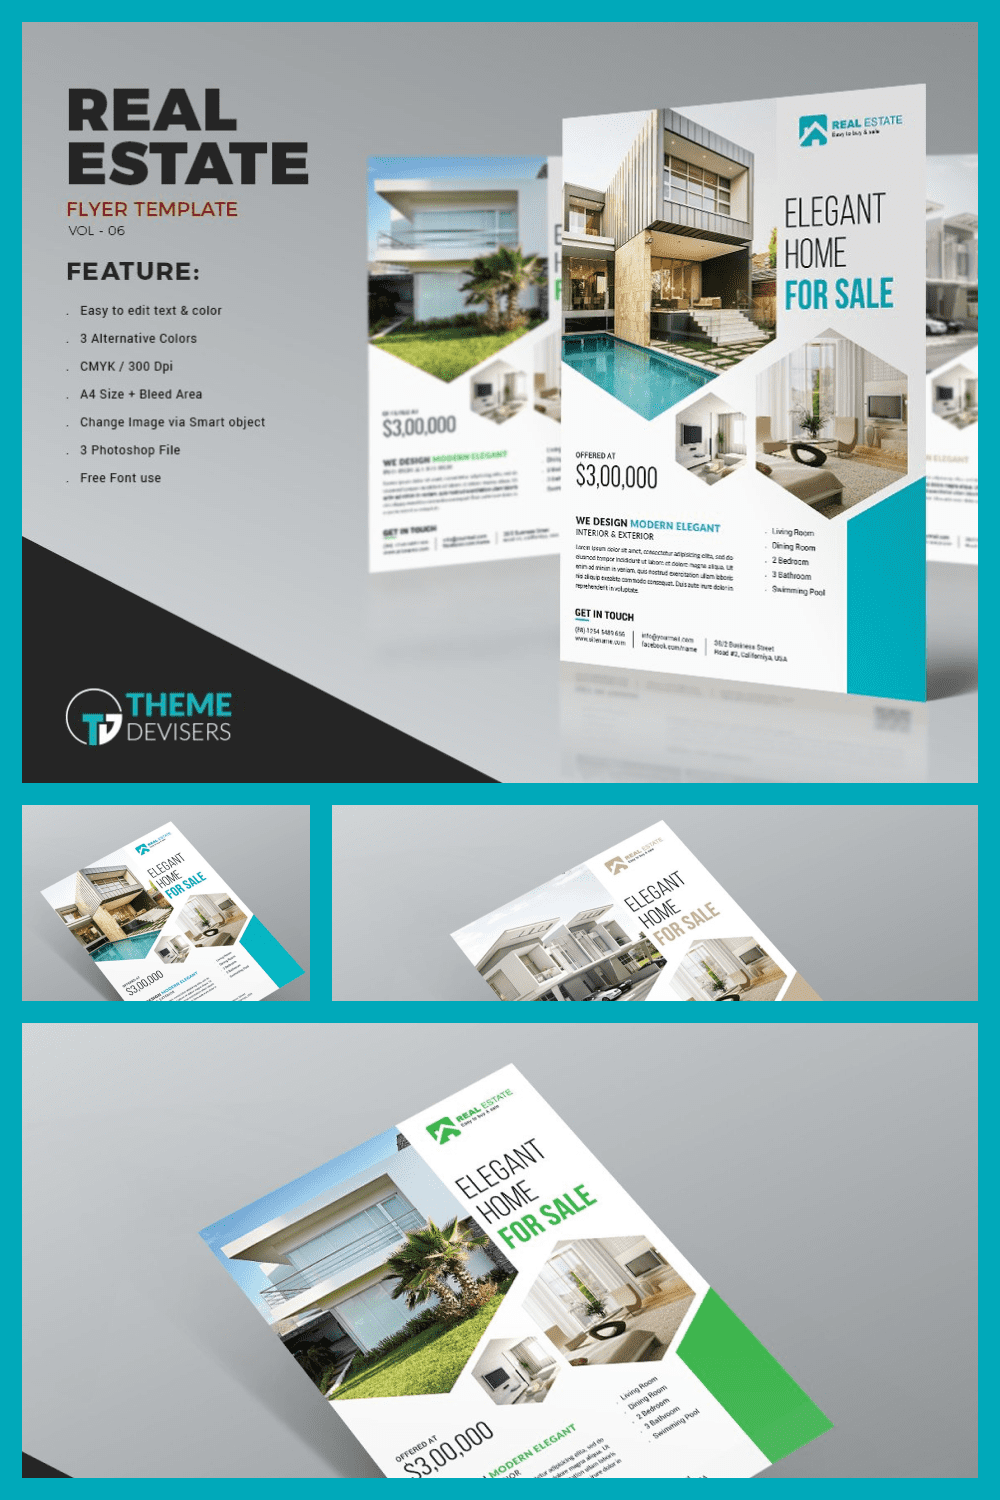 This template is helpful for a realtor, real estate agent to promote real estate business or interior design business.